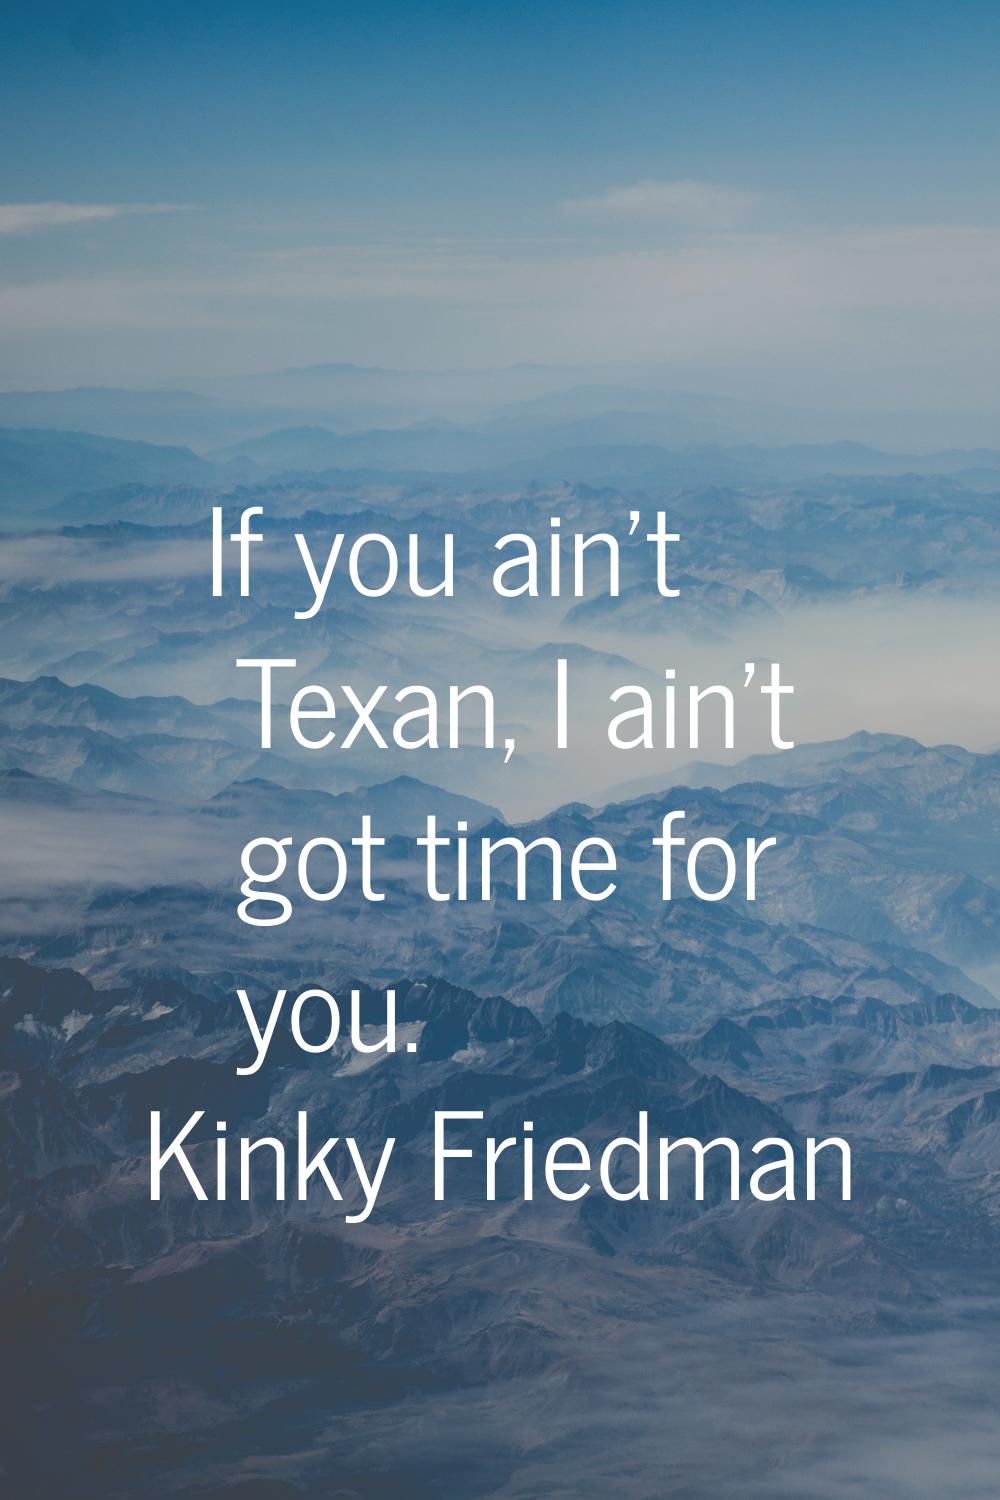 If you ain't Texan, I ain't got time for you.